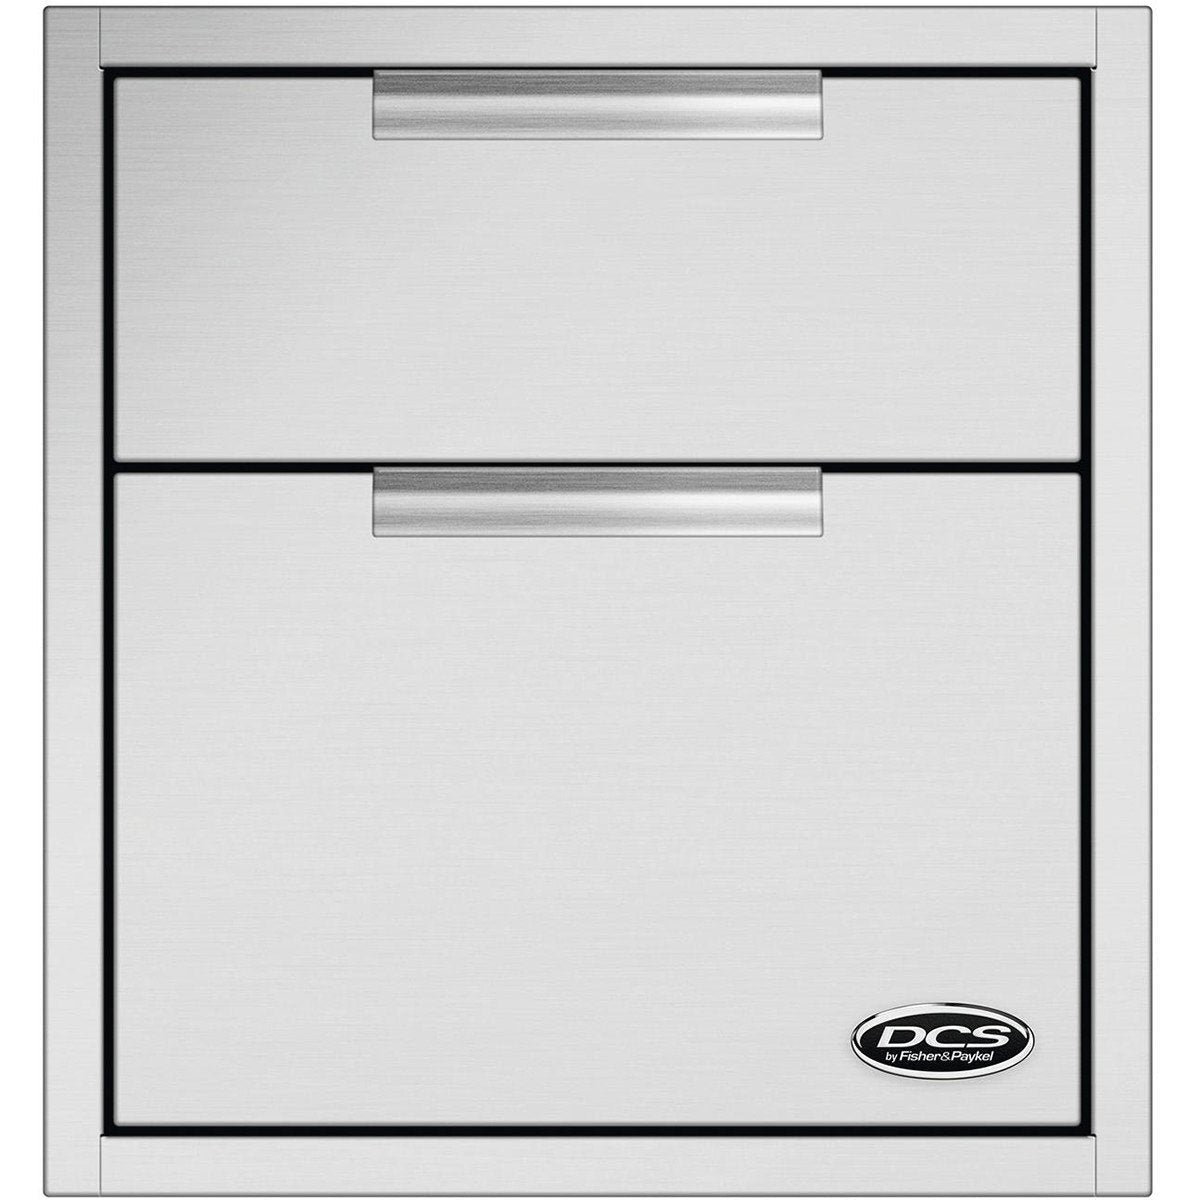 DCS 20-Inch Tower Double Drawer w/ Soft Close